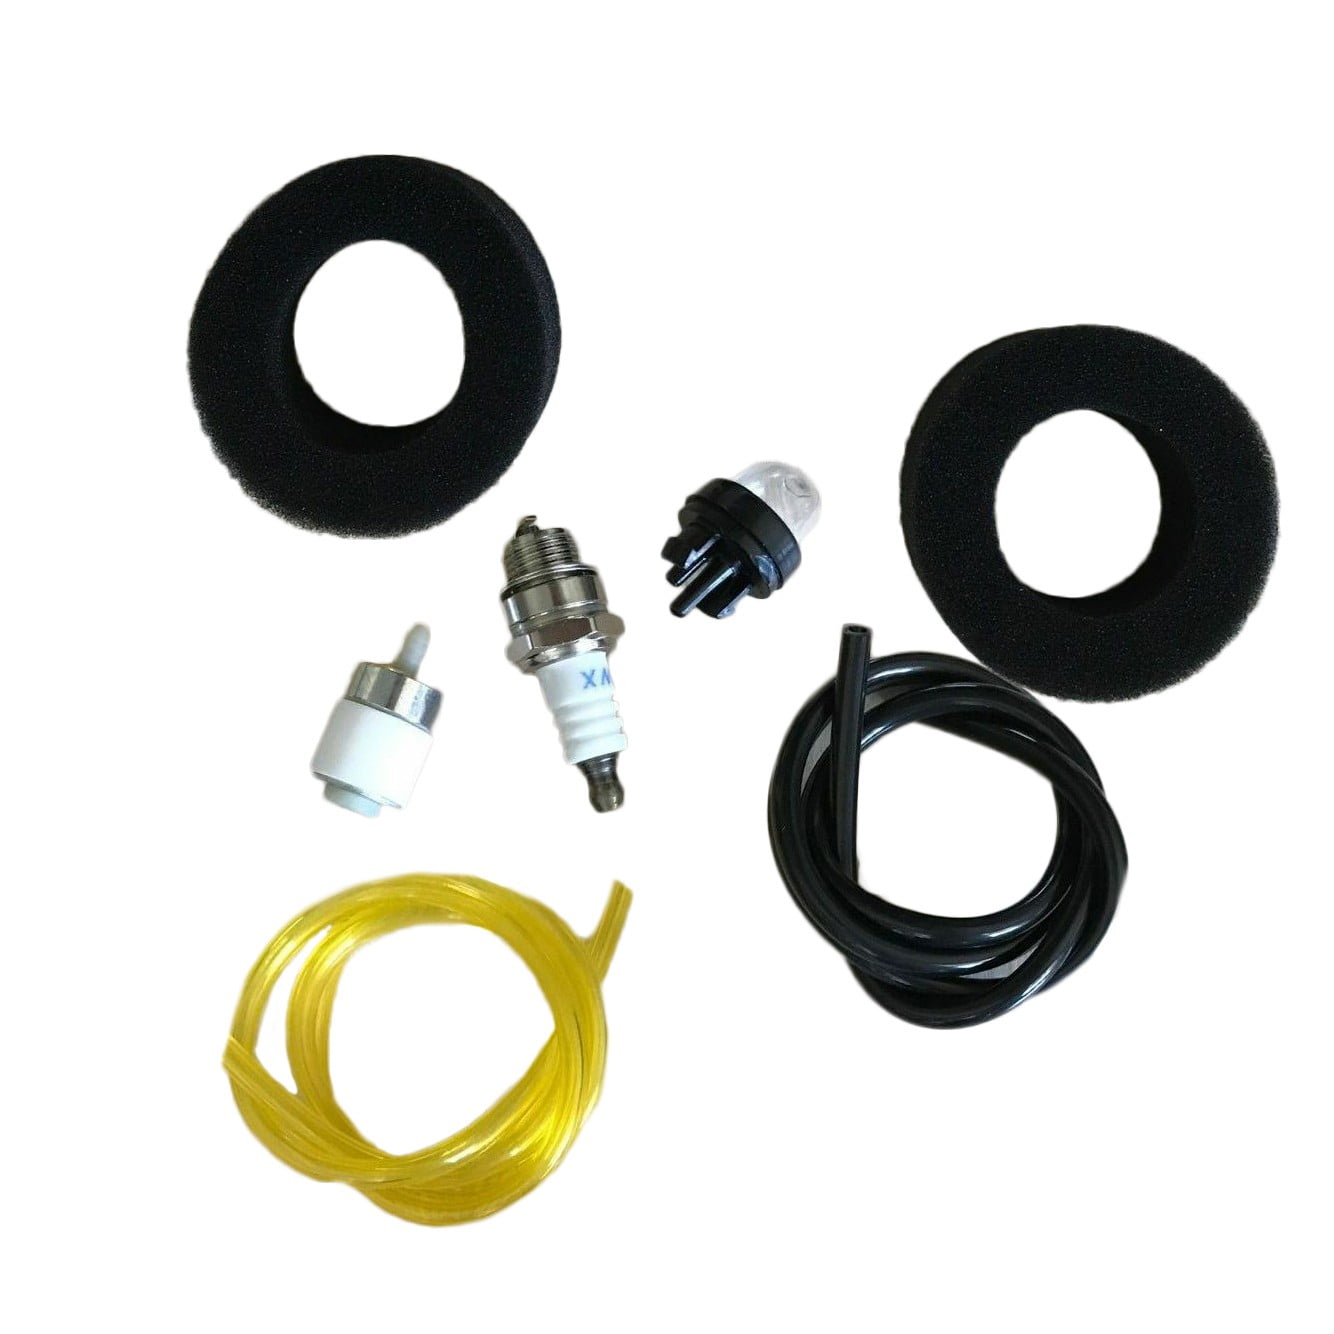 Ryobi Brushcutter Fuel Hose & Filter 1/8" Fuel Line Quality Replacement 